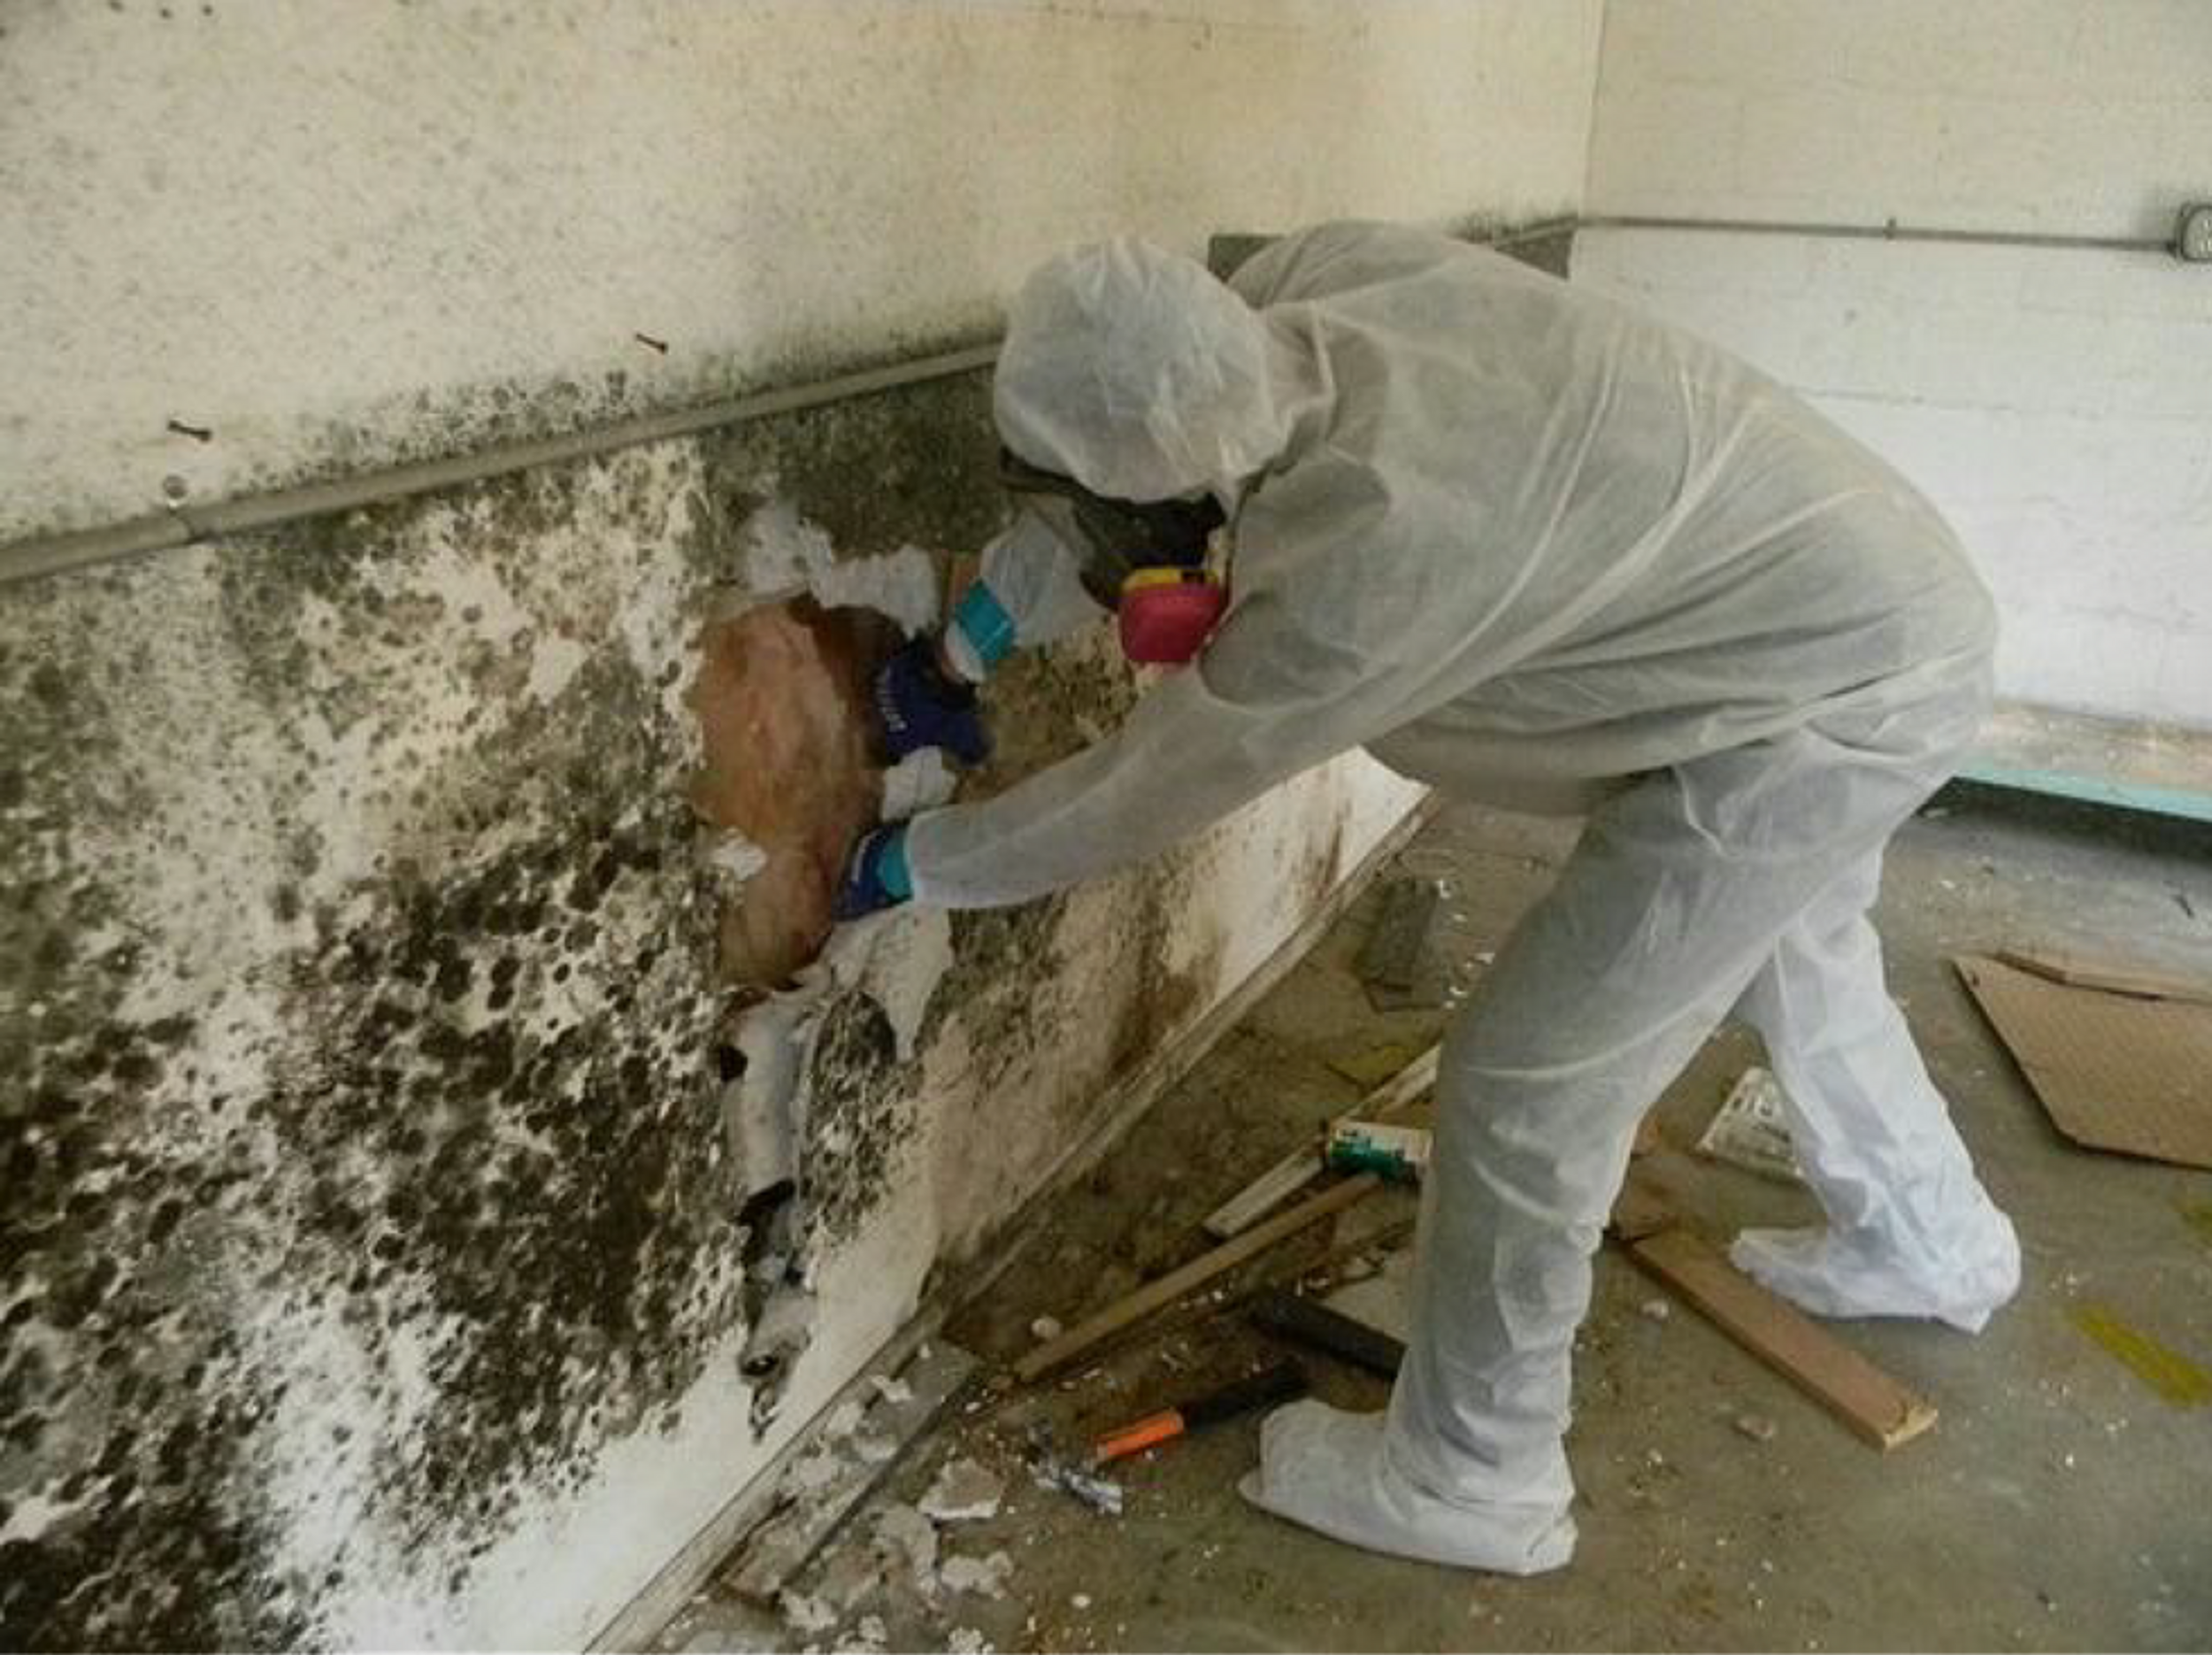 Expert Recommendations to Prevent and Remove Household Mold